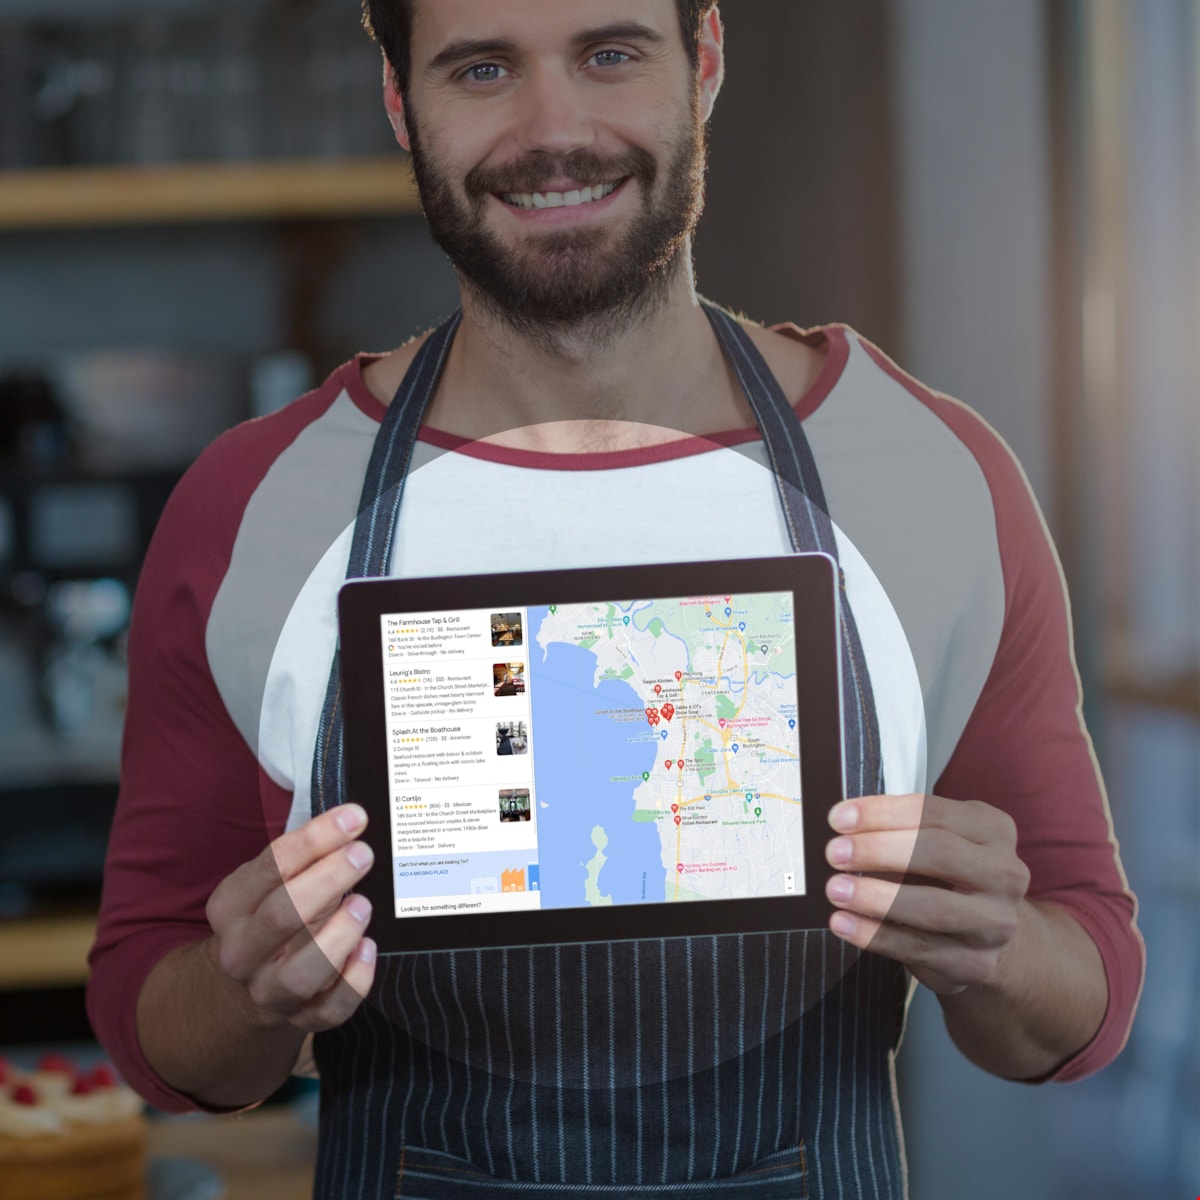 man holding a tablet showing search results for restaurants